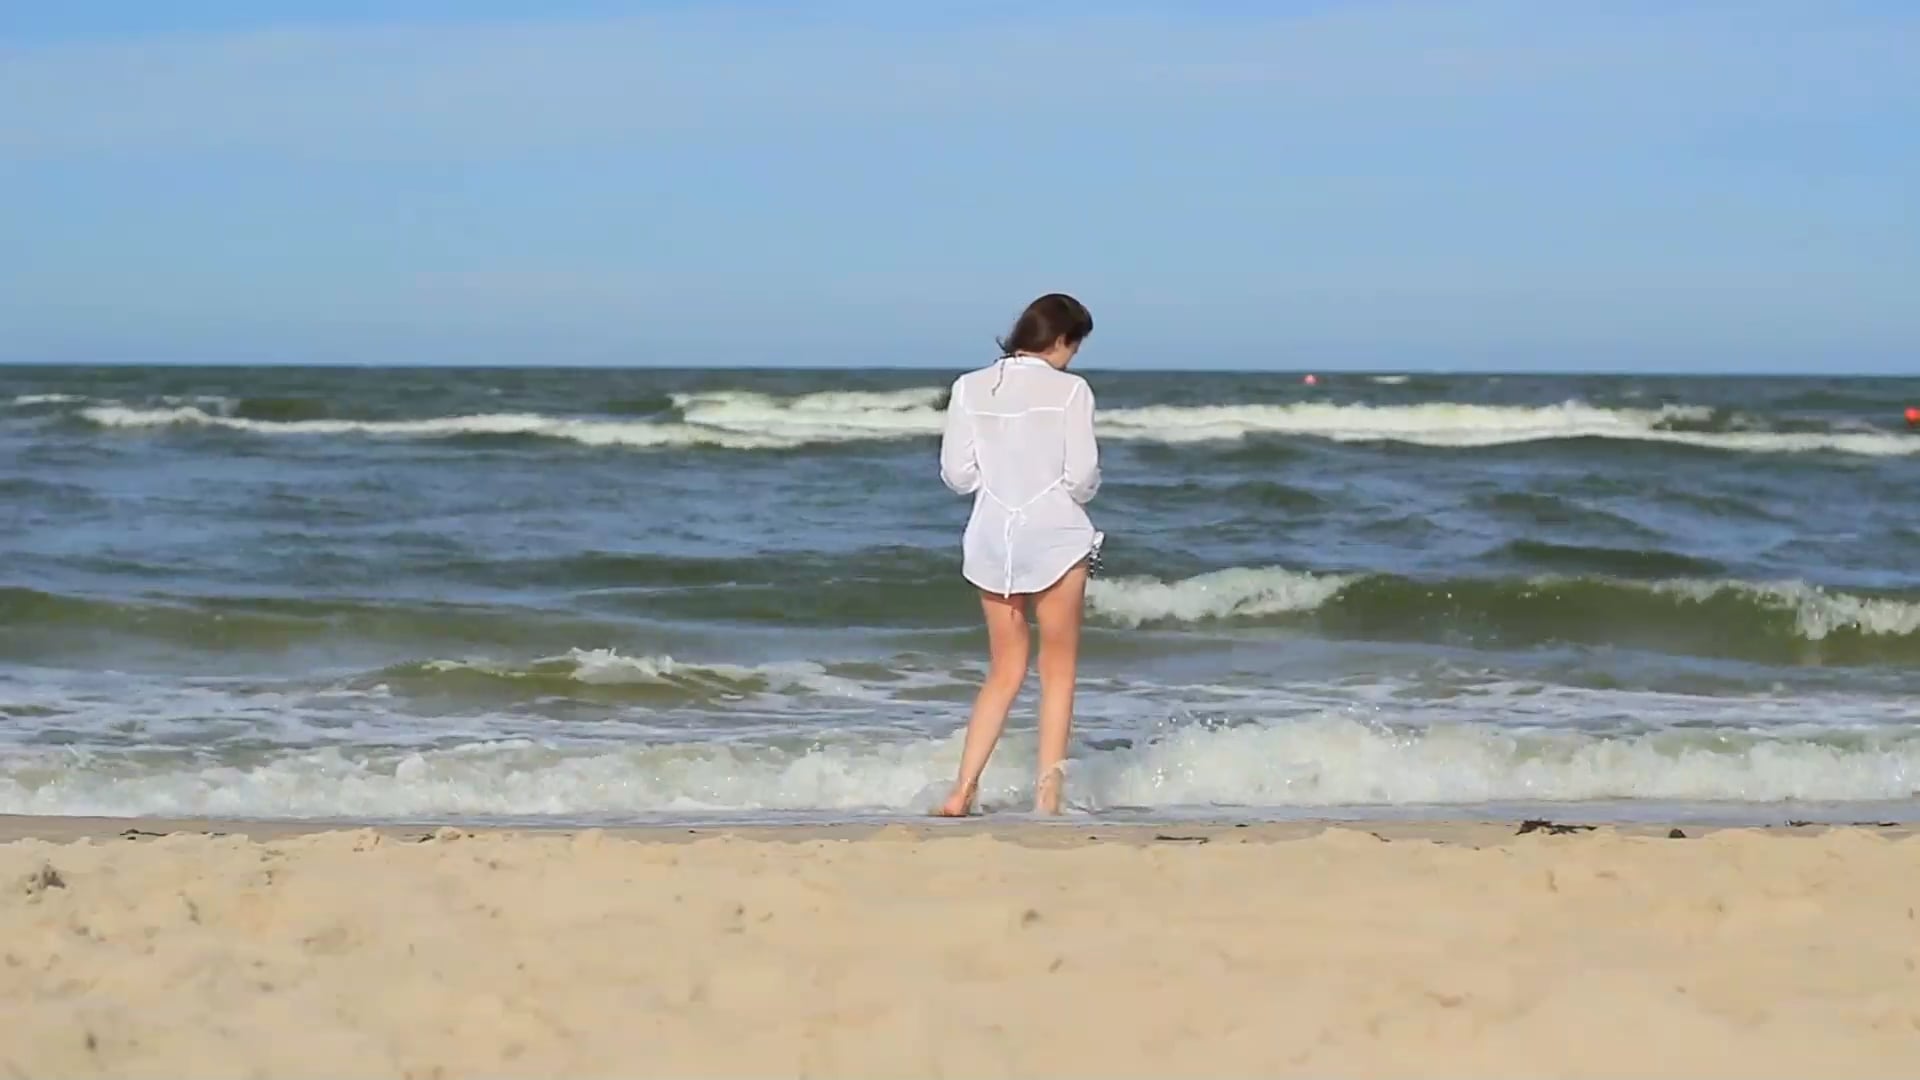 Girl At The Beach Walking Through Sea Water HD Free Stock Video Footage